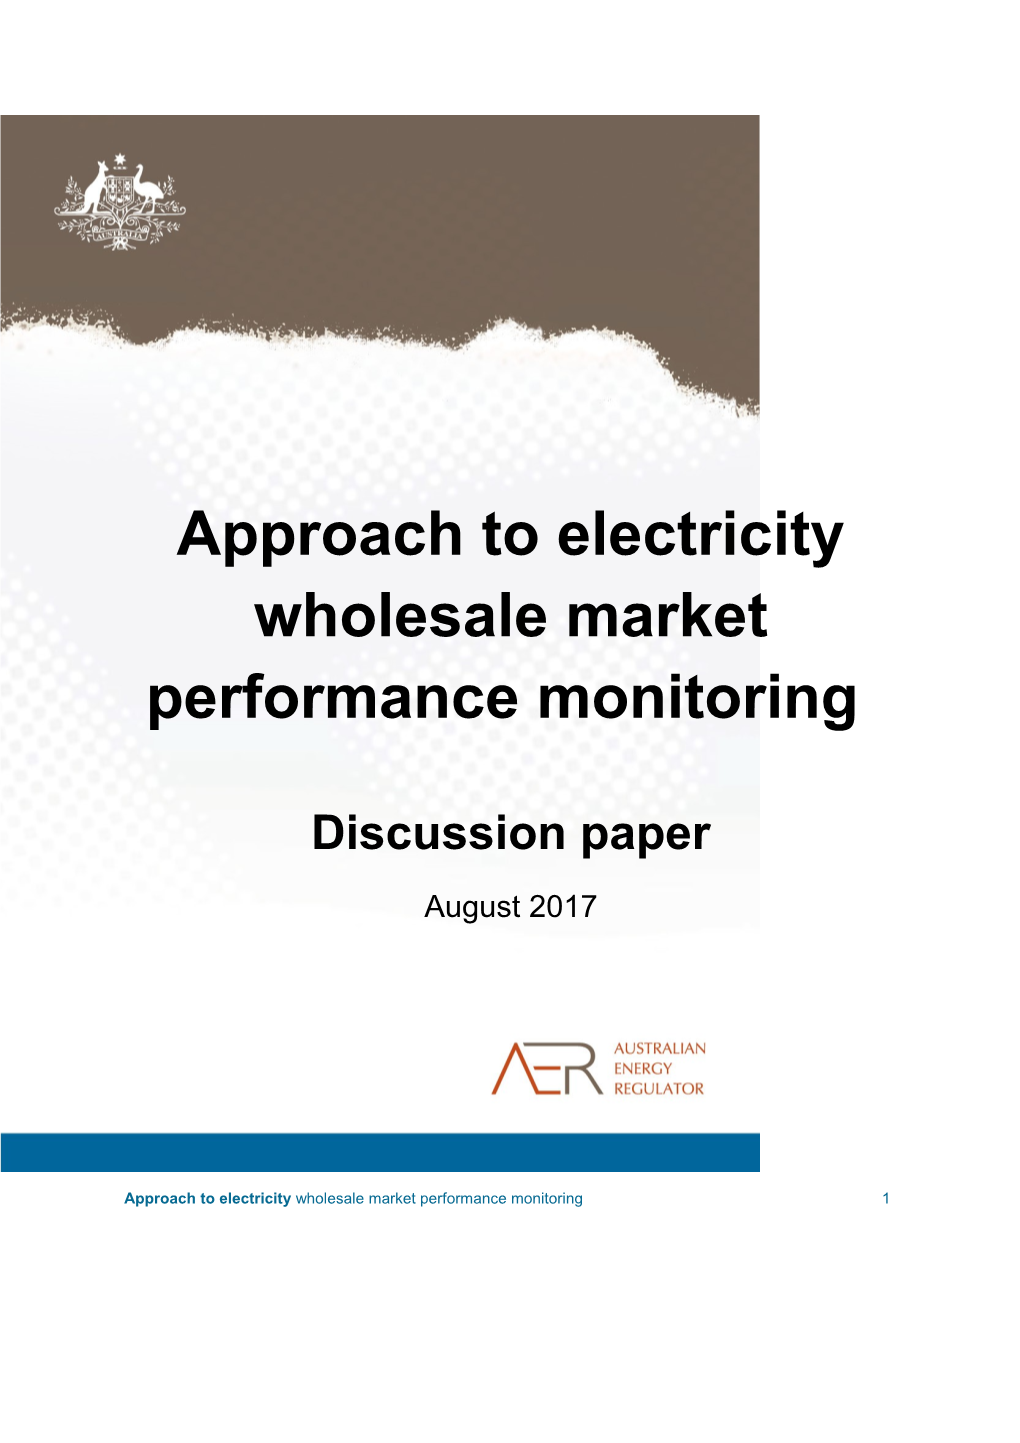 Approach to Electricity Wholesale Market Performance Monitoring